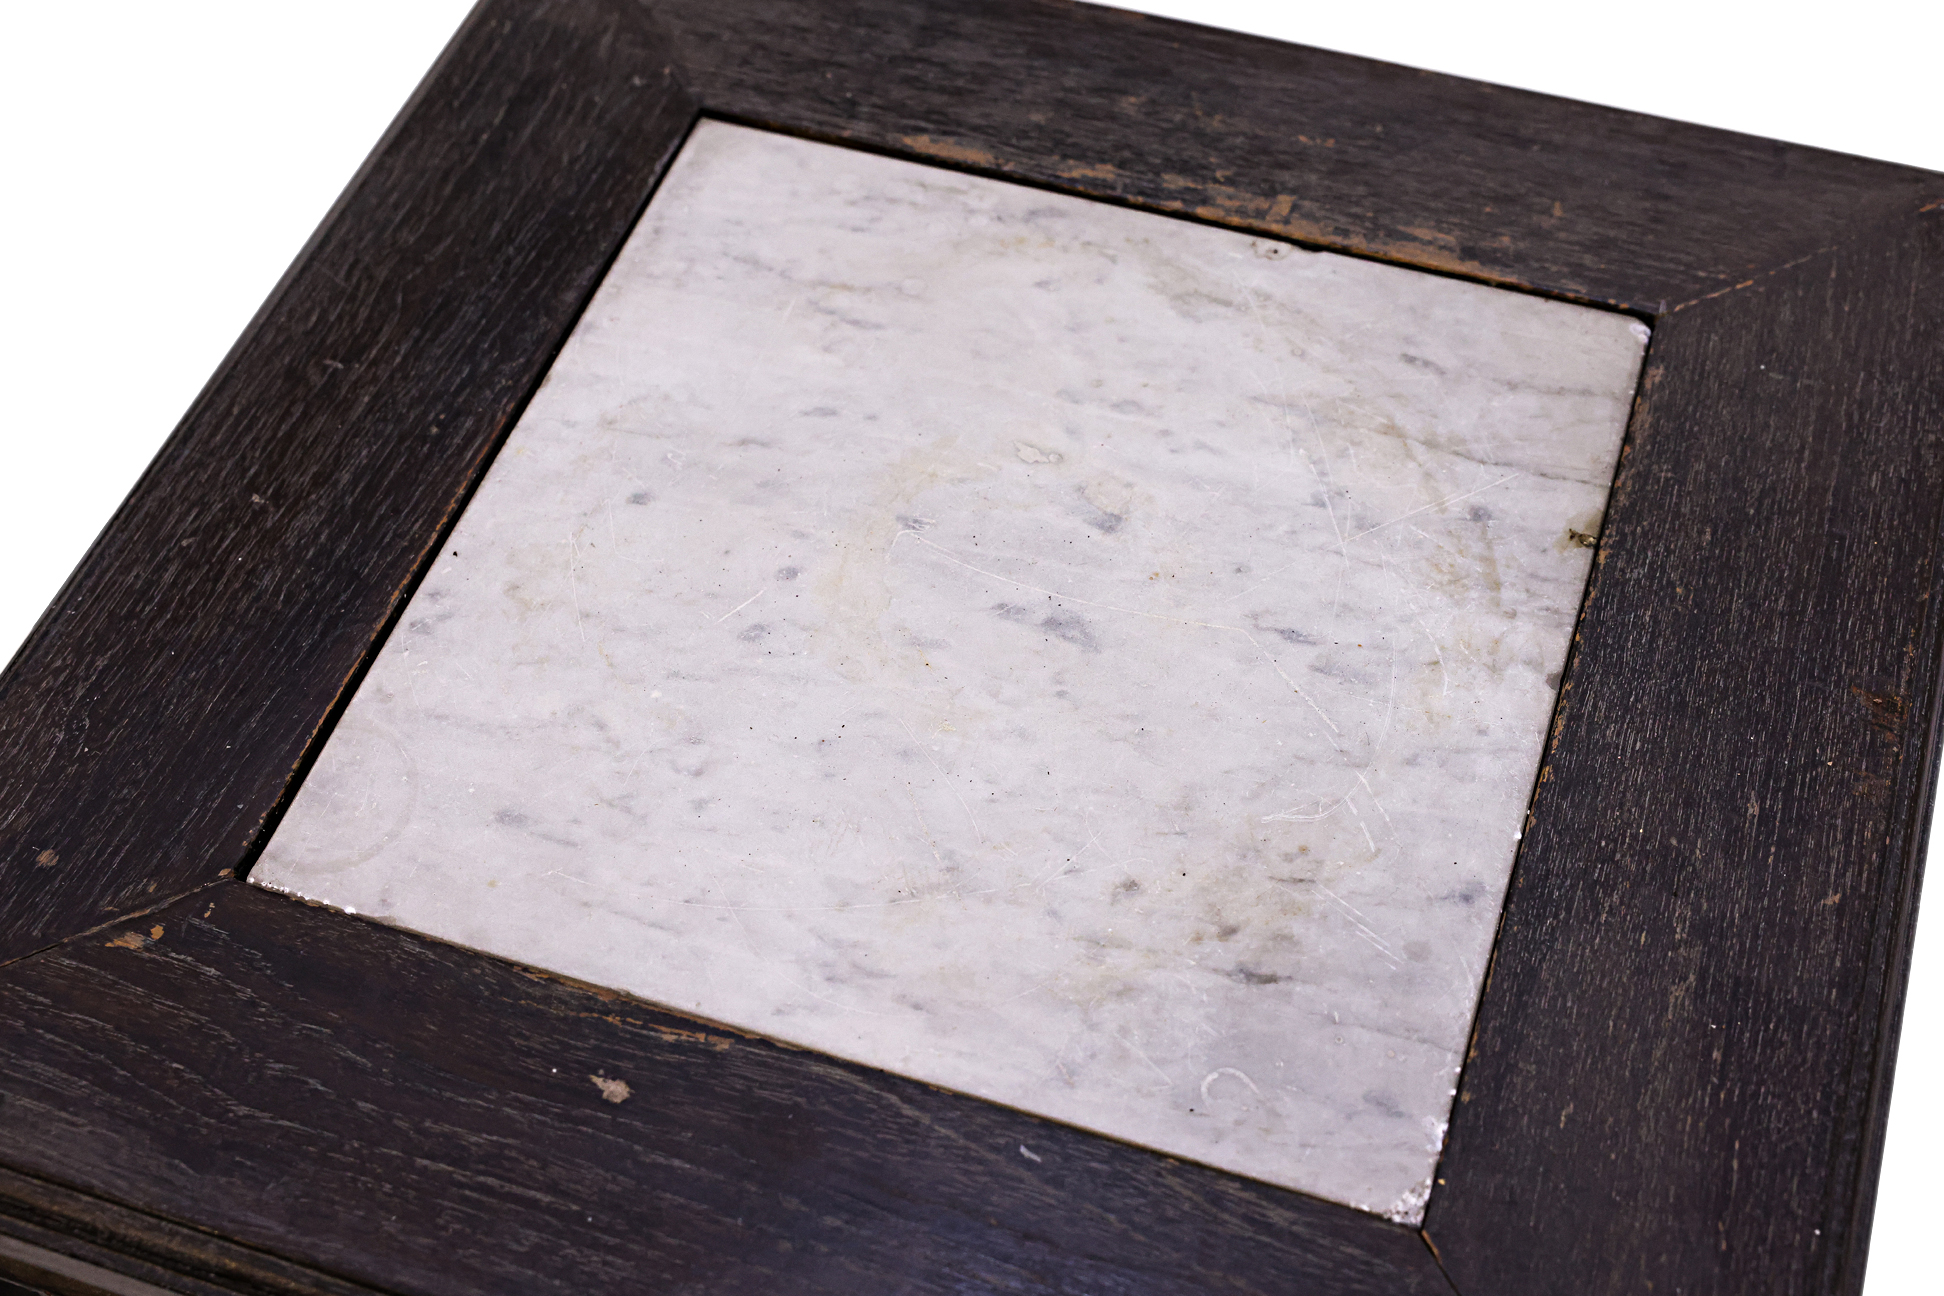 A PAIR OF MARBLE INSET HARDWOOD SIDE TABLES - Image 2 of 2